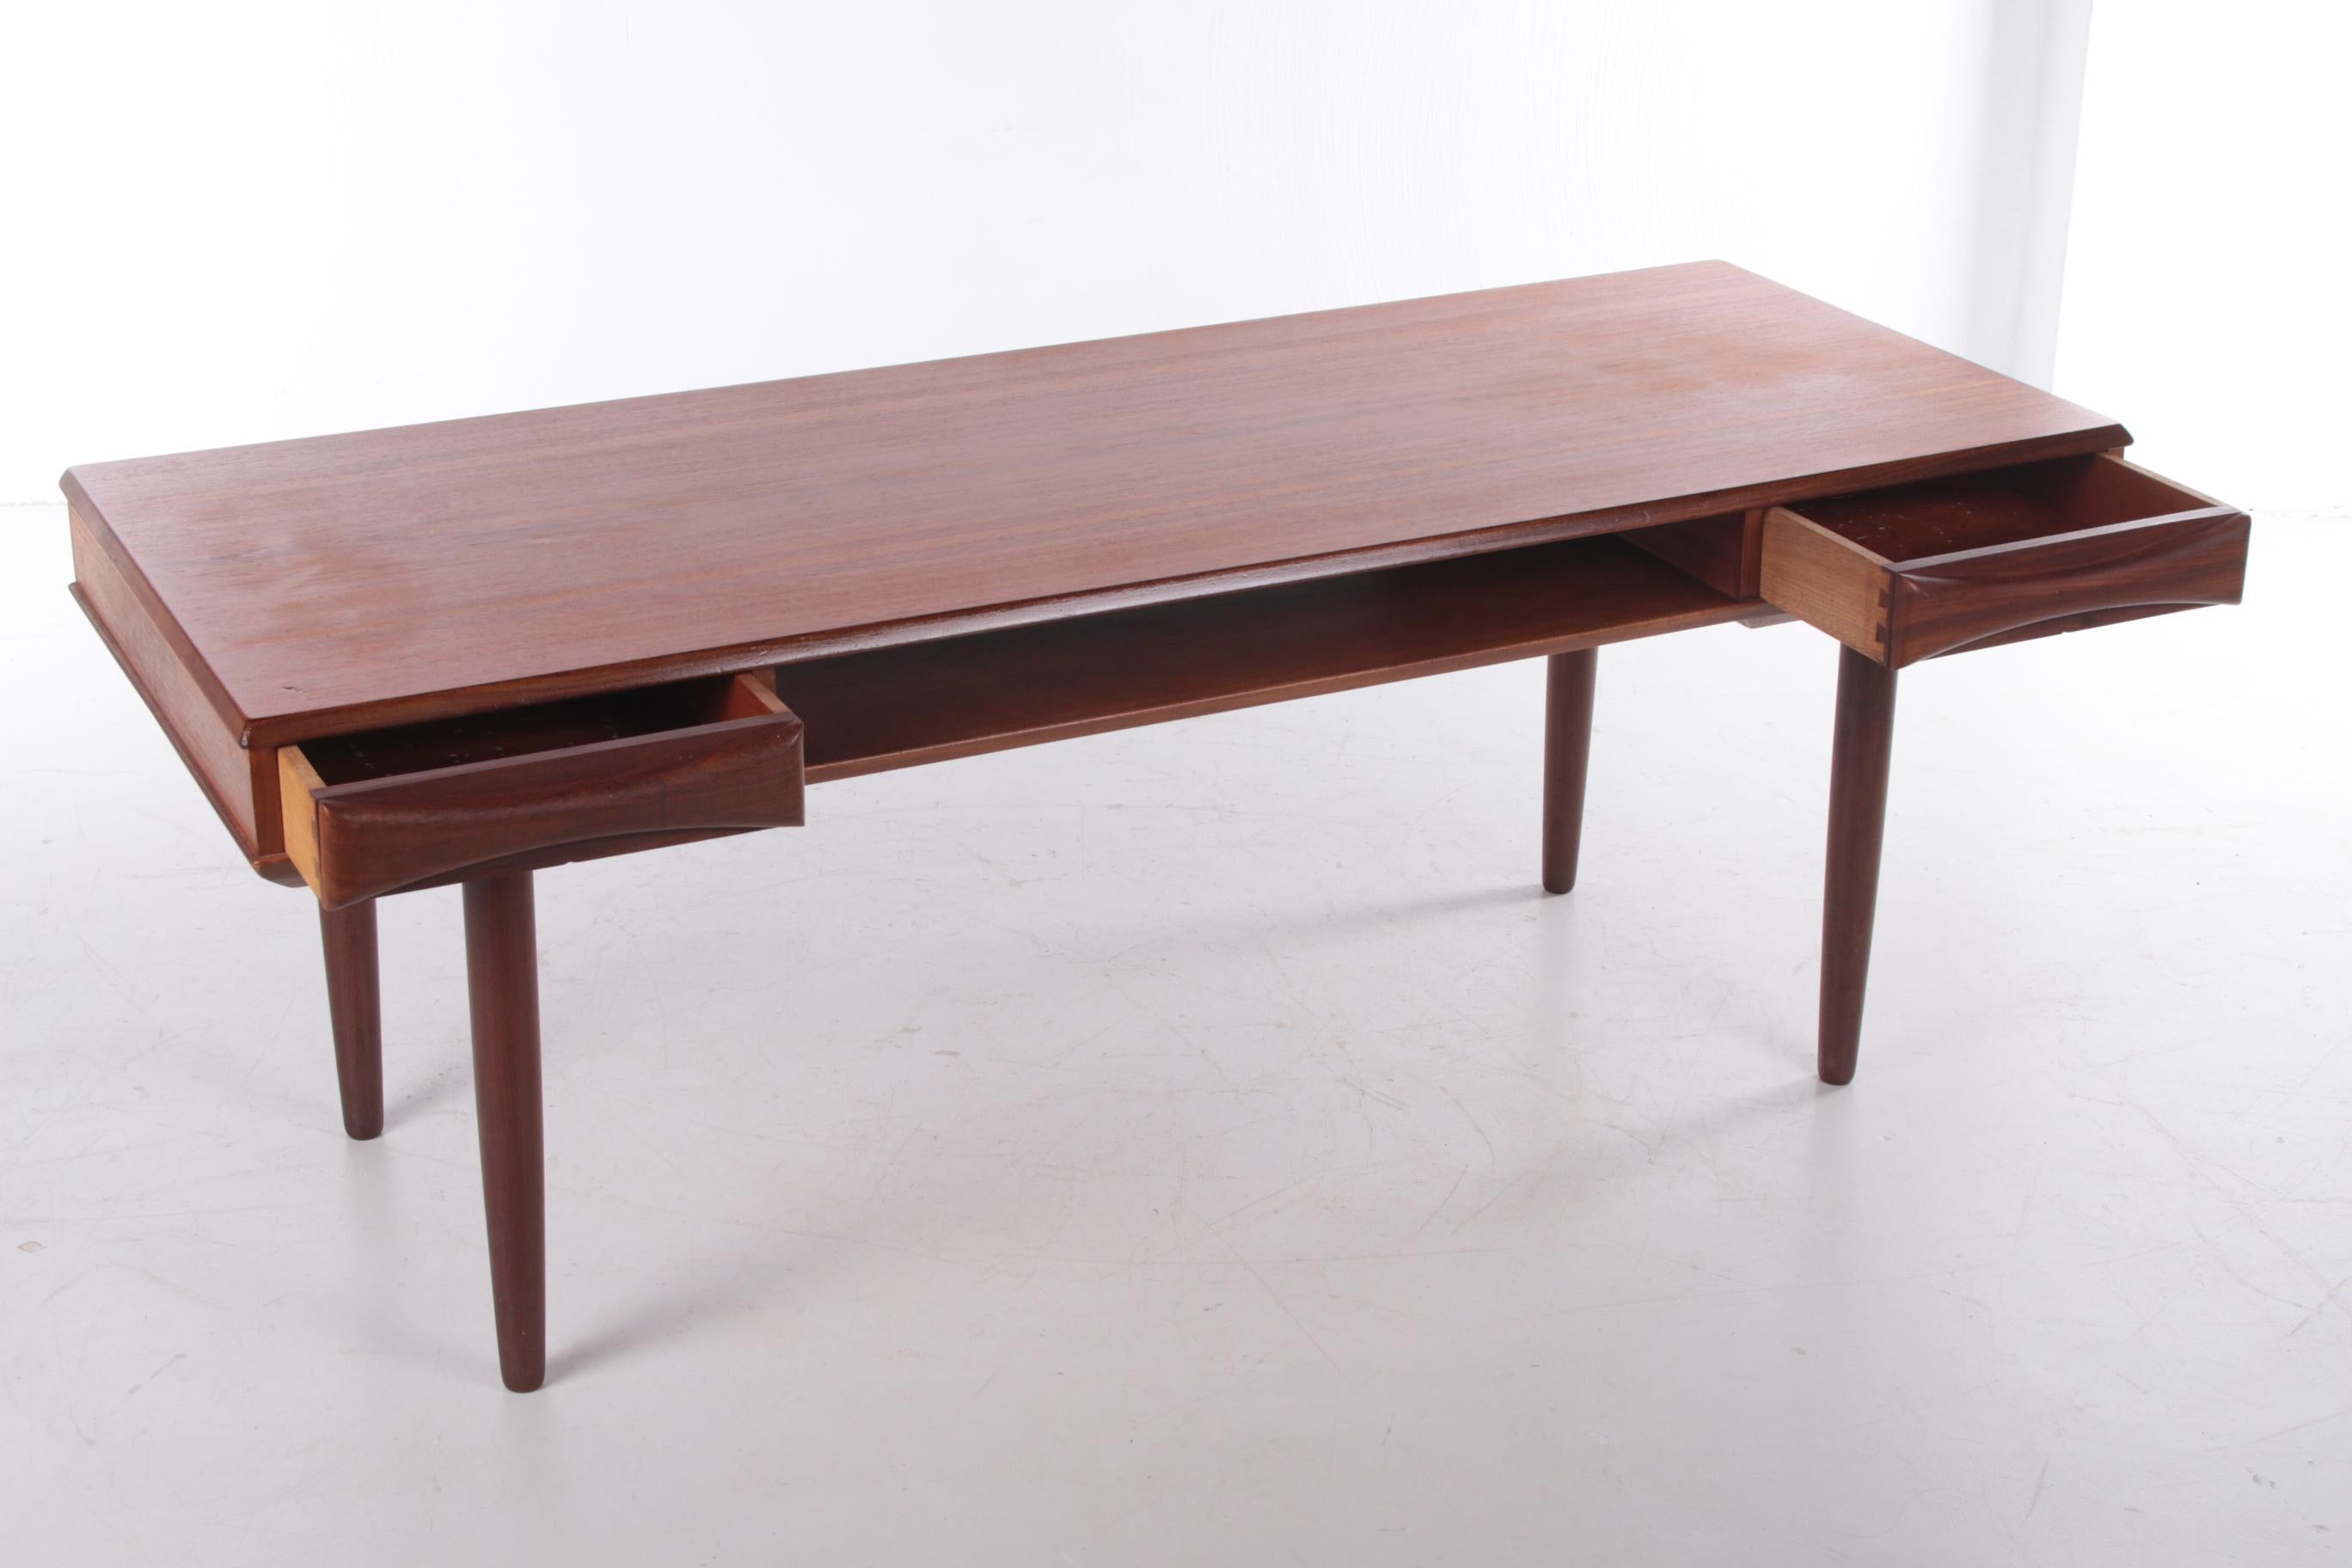 Danish Modernist Teak Coffee Table Made by Dyrlund, 1960s For Sale 4